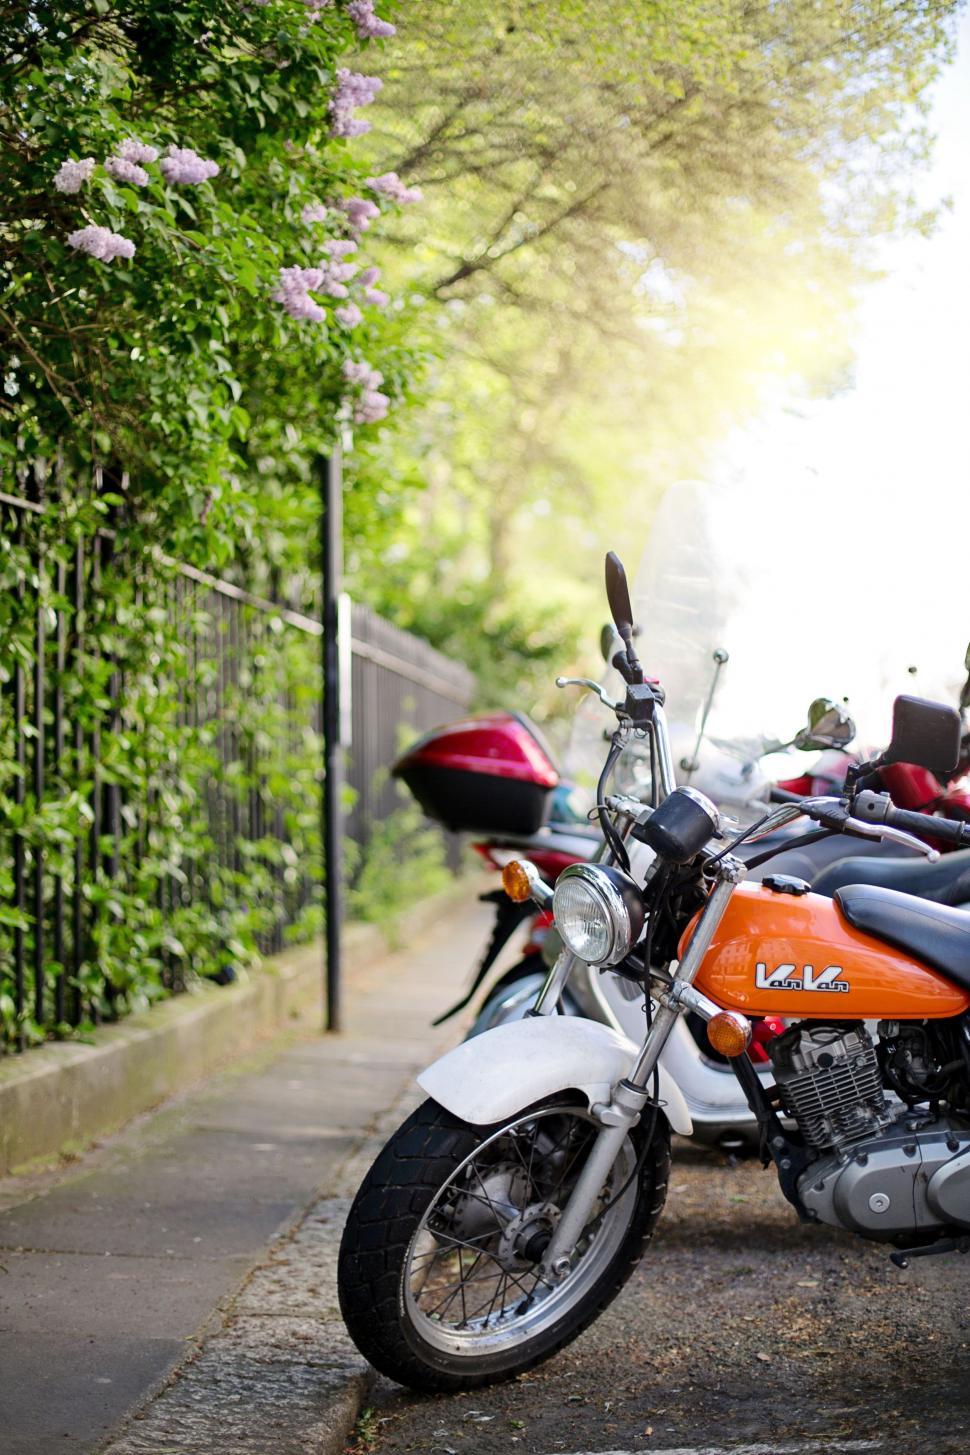 Free Image of Motorcycle parked outside  